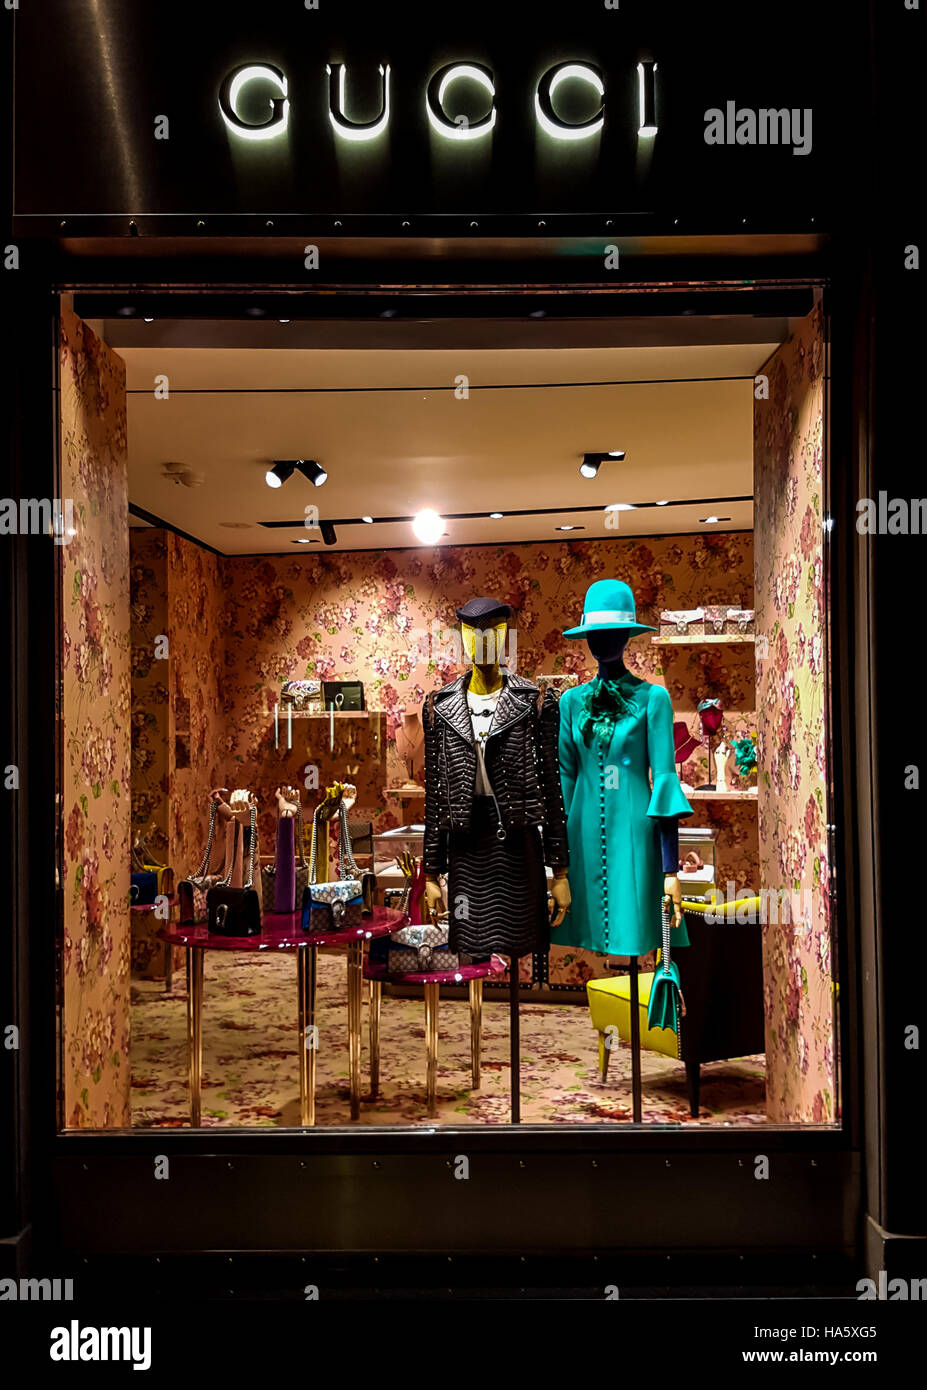 Gucci luxury bags, clothes and shoes sit displayed for sale inside a Gucci  store in Florence, Italy Stock Photo - Alamy